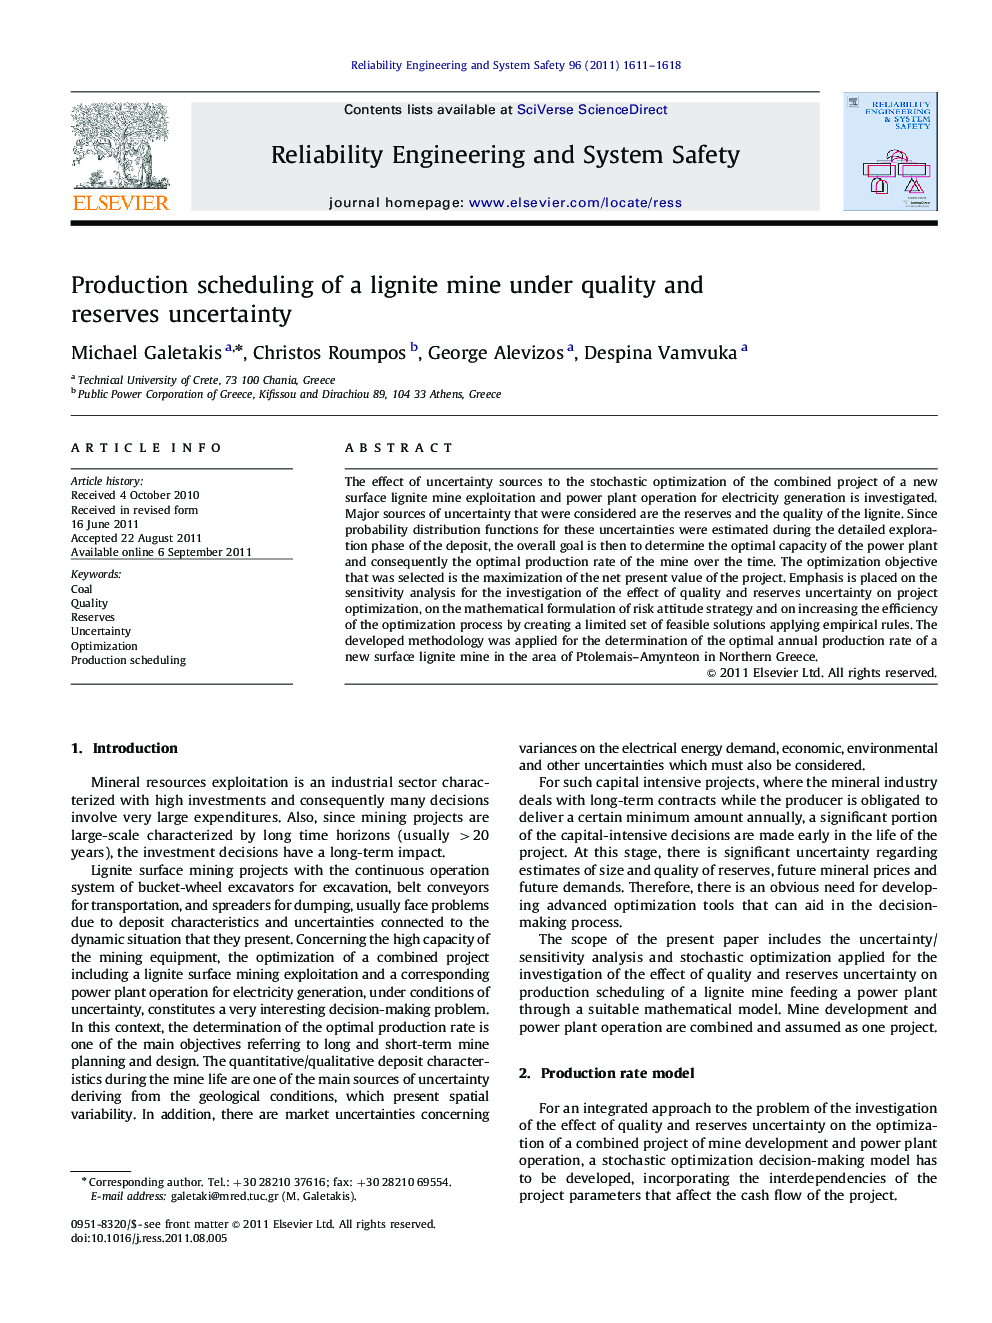 Production scheduling of a lignite mine under quality and reserves uncertainty